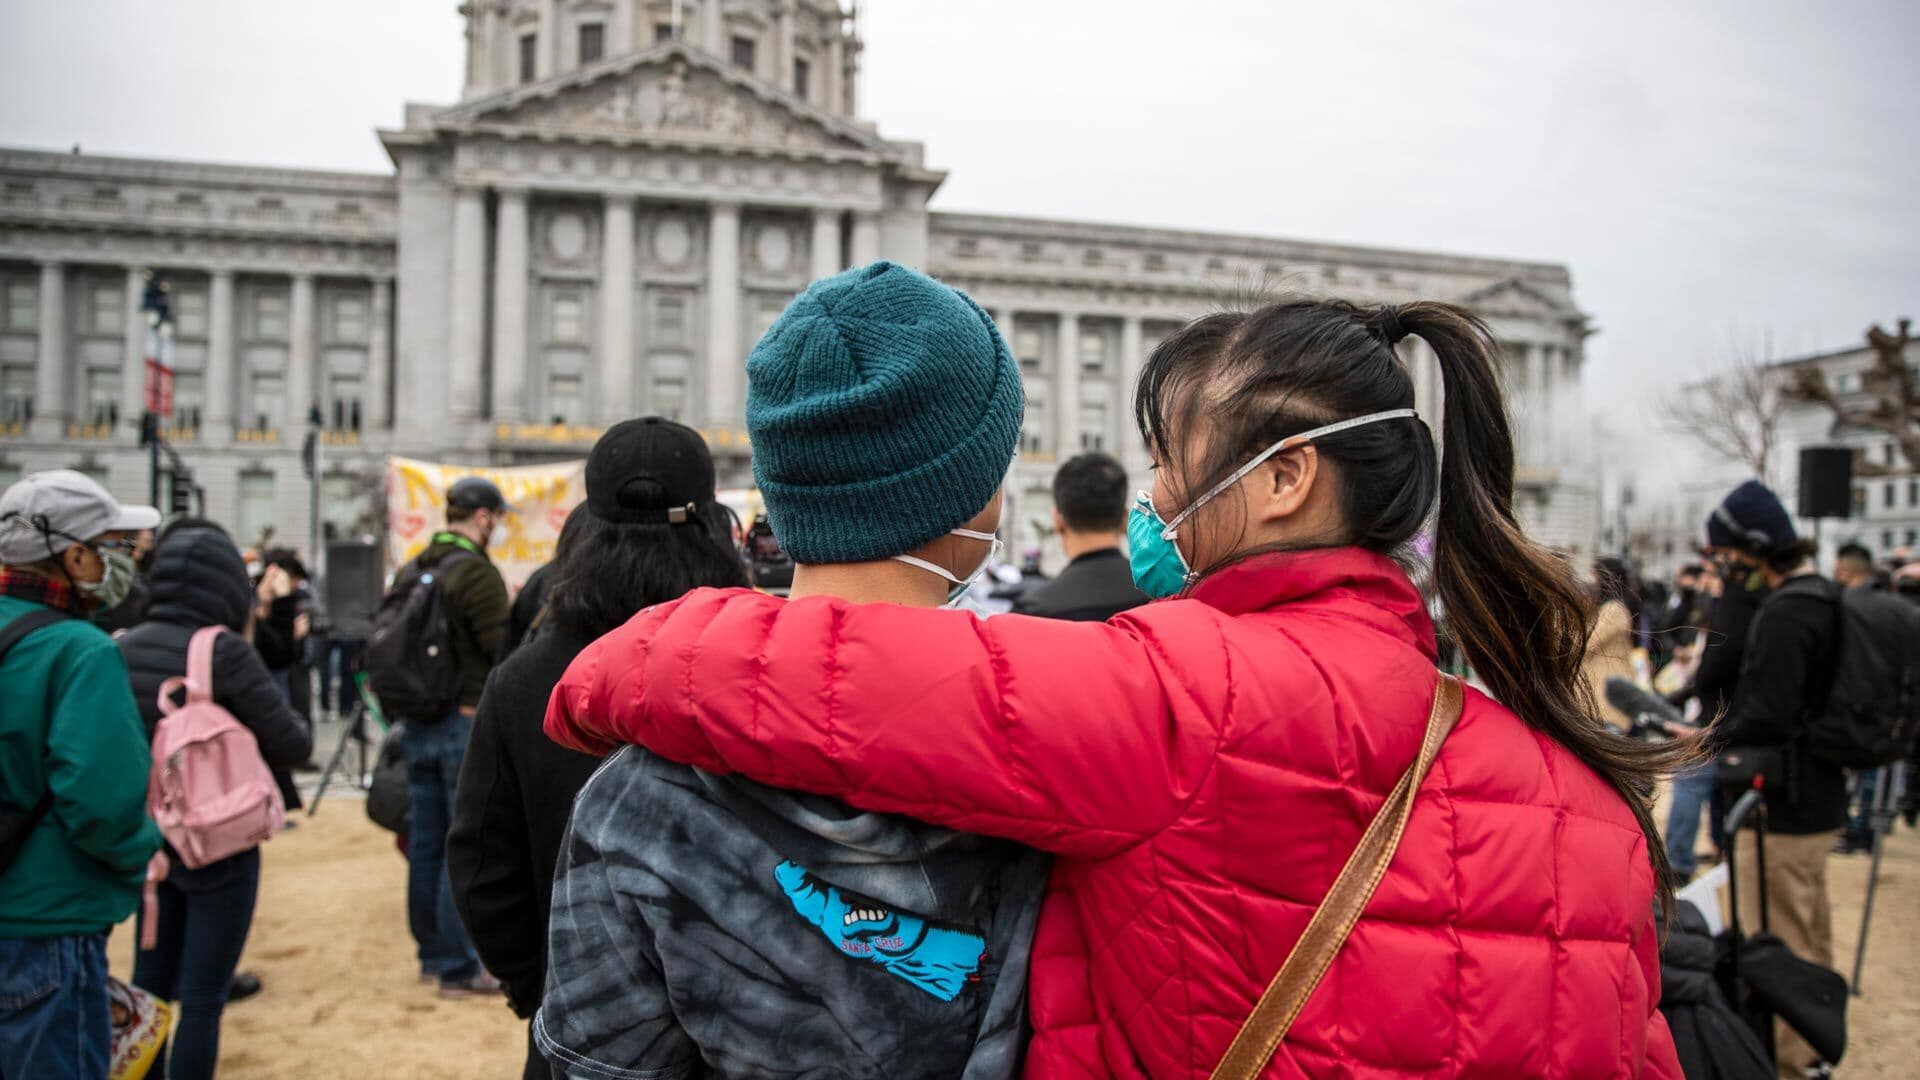 Natalie Choi, 18, embraces her younger brother, Aidan, at a San Francisco rally